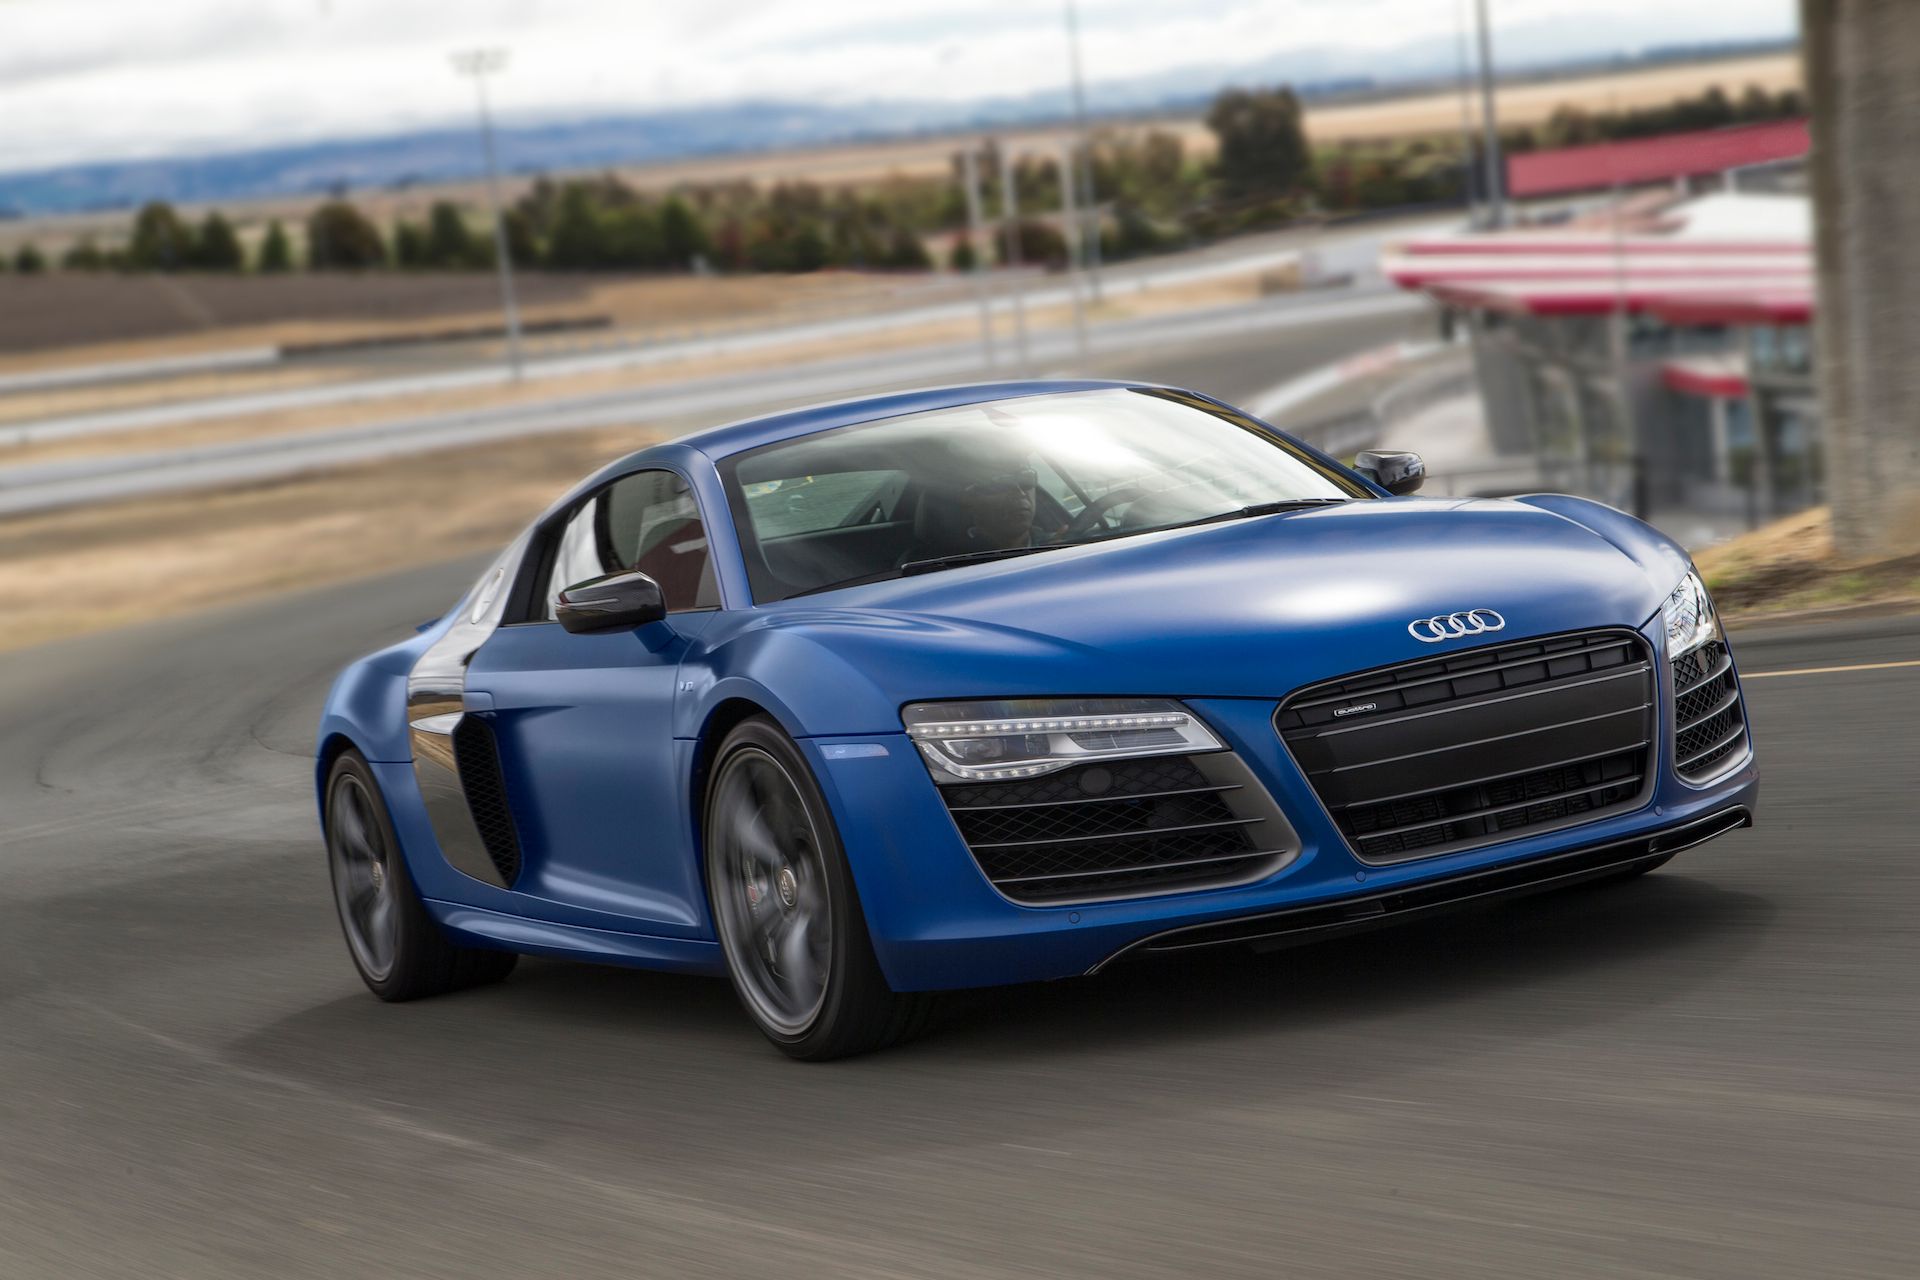 The 2015 Audi R8 on the road